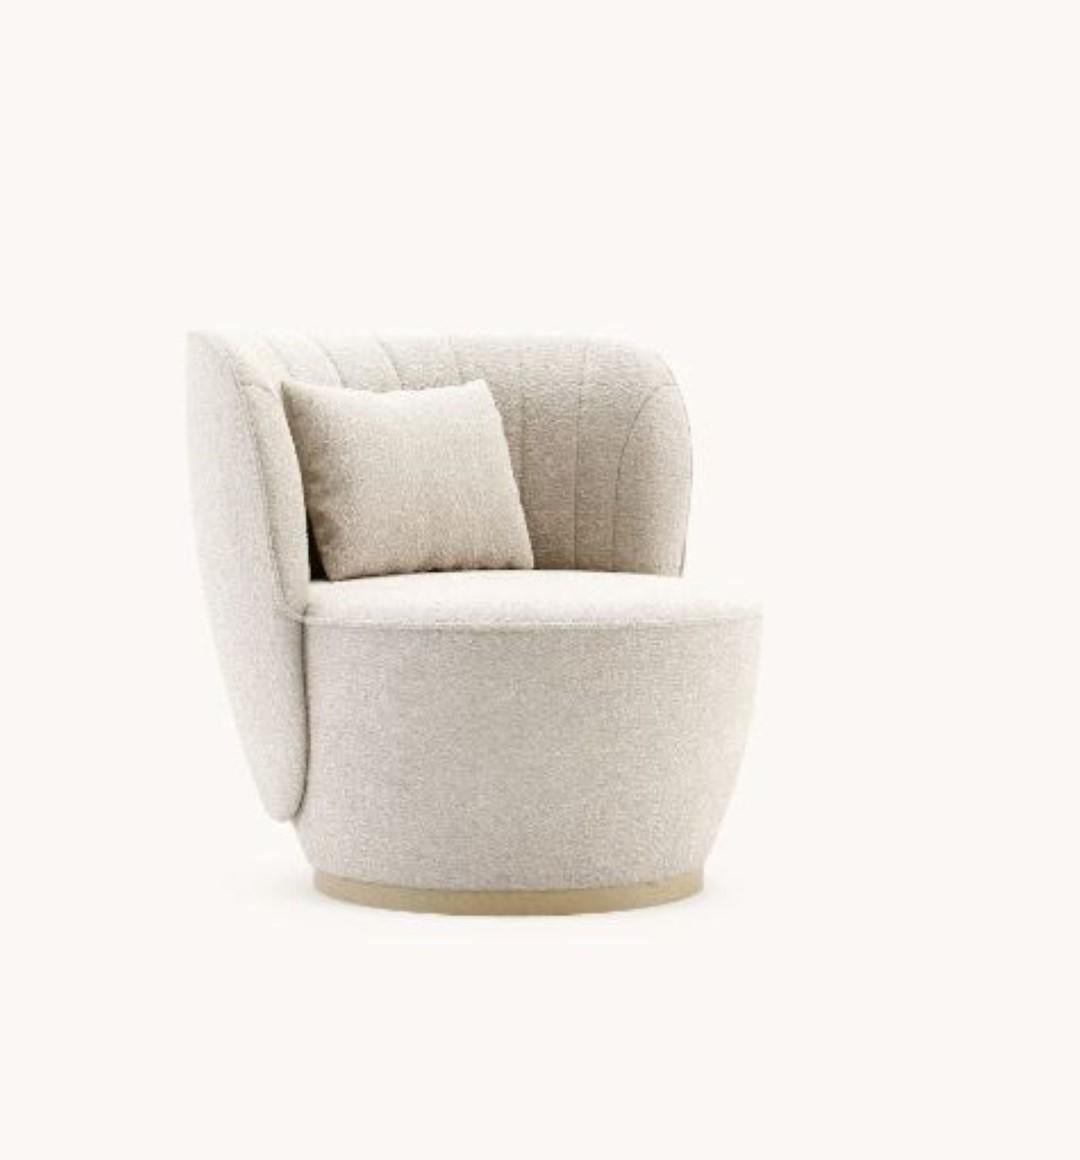 Pearl armchair by Domkapa
Materials: Natural Ash, Bouclé. 
Dimensions: W 88 x D 82 x H 78 cm. 
Also available in different materials. Please contact us.

Pearl armchair holds an exclusive language for its peculiar design. With a deep convex